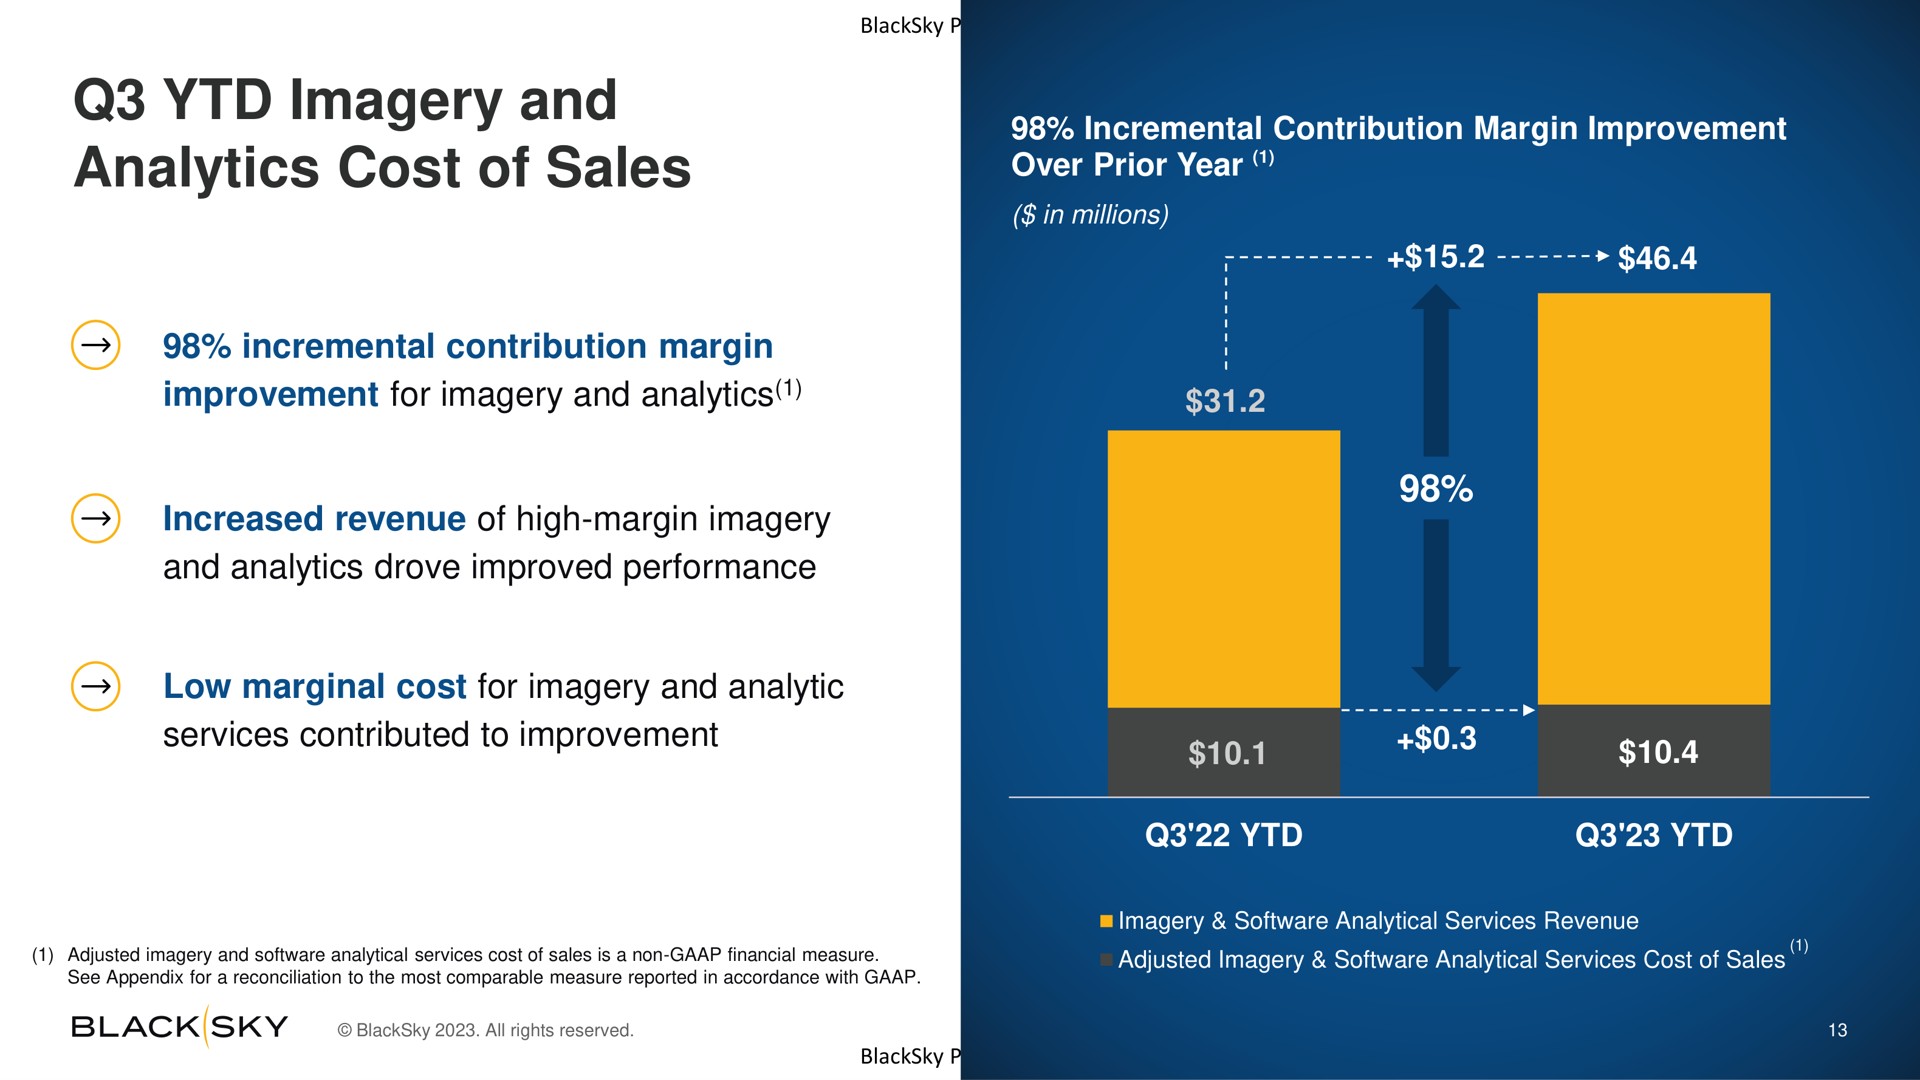 imagery and analytics cost of sales | BlackSky